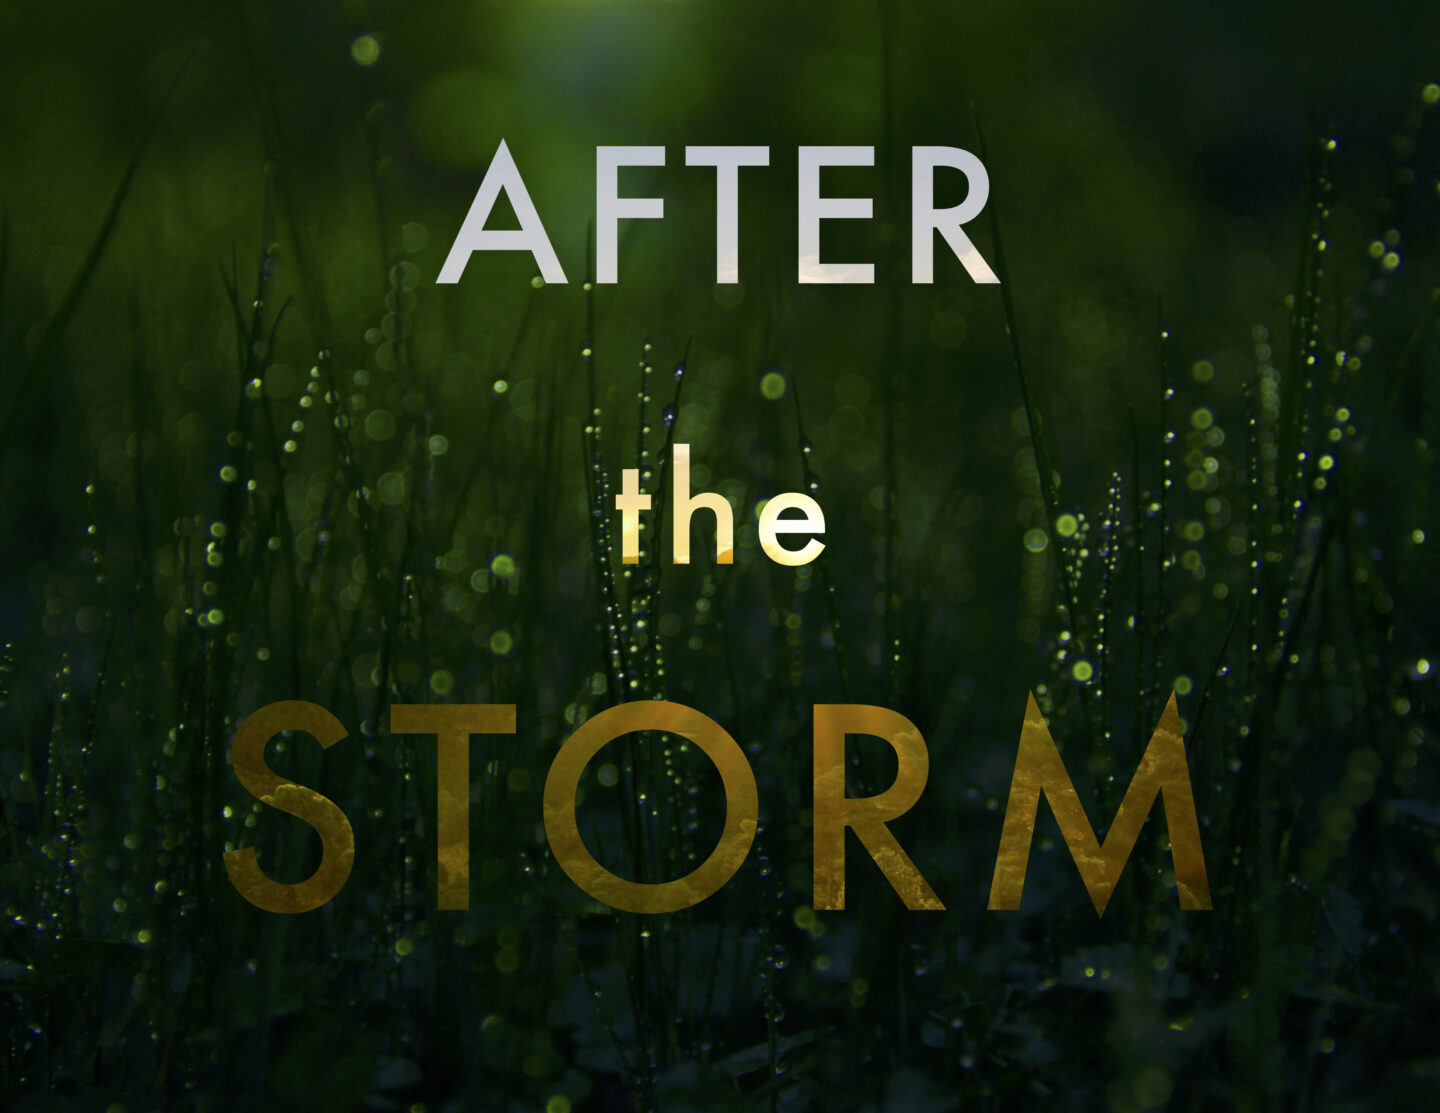 After the Storm show by Contemporaneous